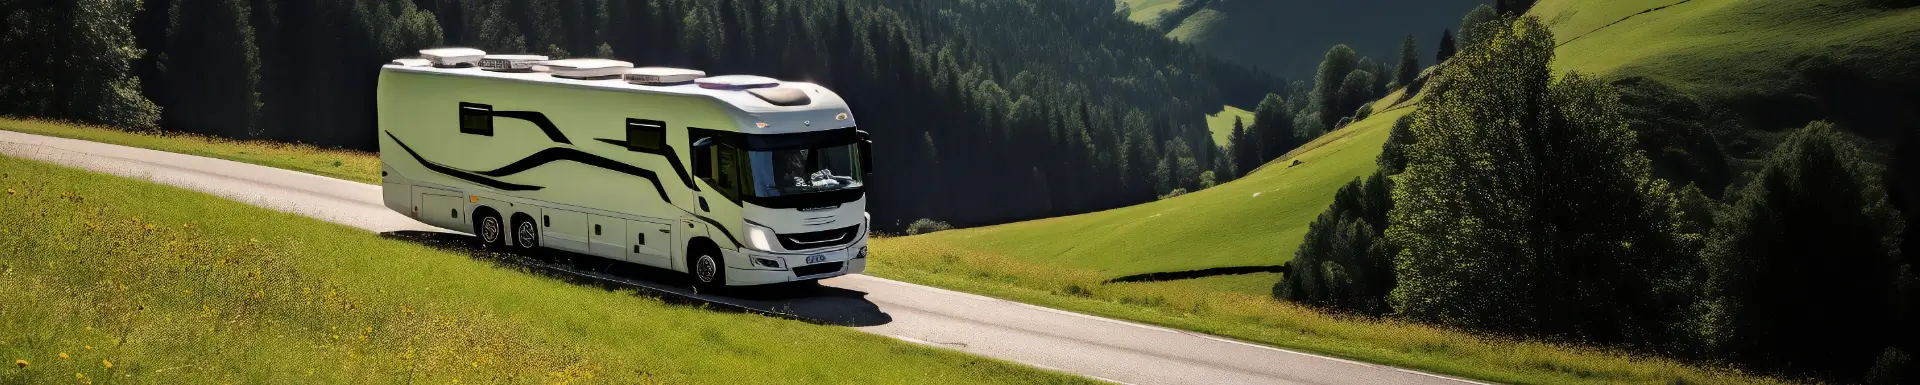 A large RV drives through the mountains